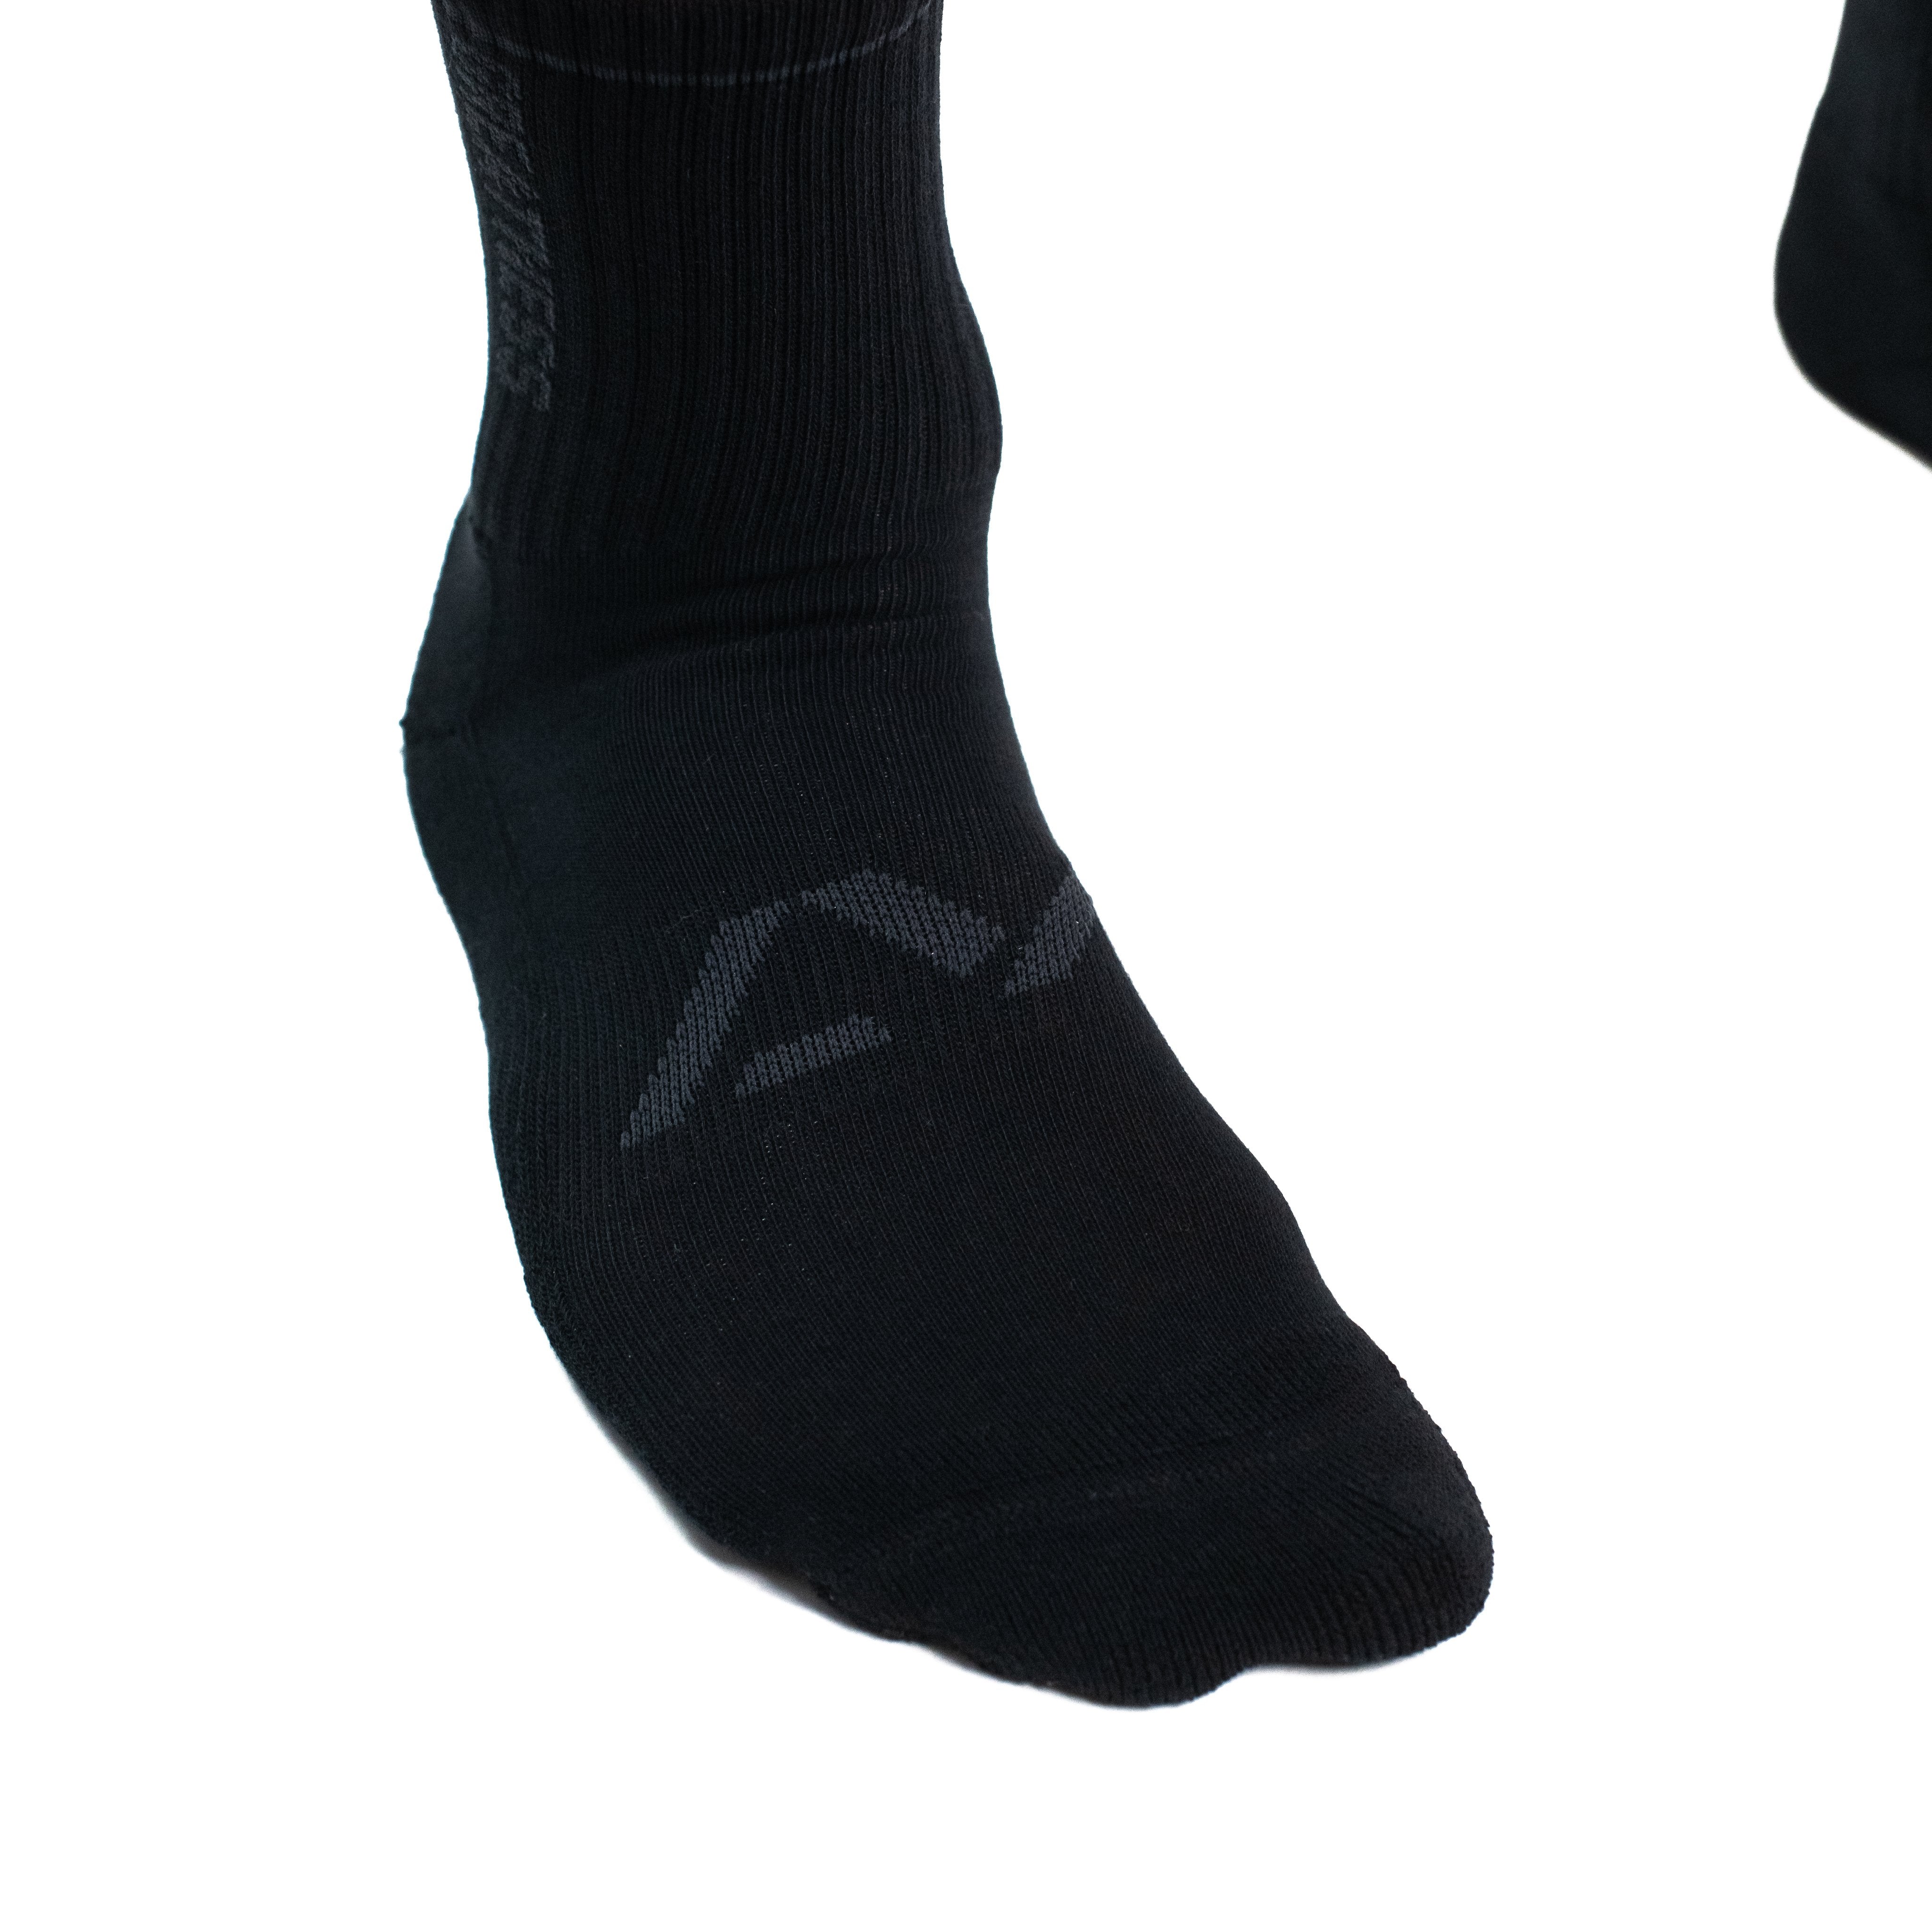 This Stealth Crew socks were created with muted out the logos and keep contrast at a minimum and let your energy show on the platform, in your training or while out and about. Our Crew socks offer a level of comfort like no other through their unique blend of materials and stretch in the places you desire for an ultra comfortable sock.